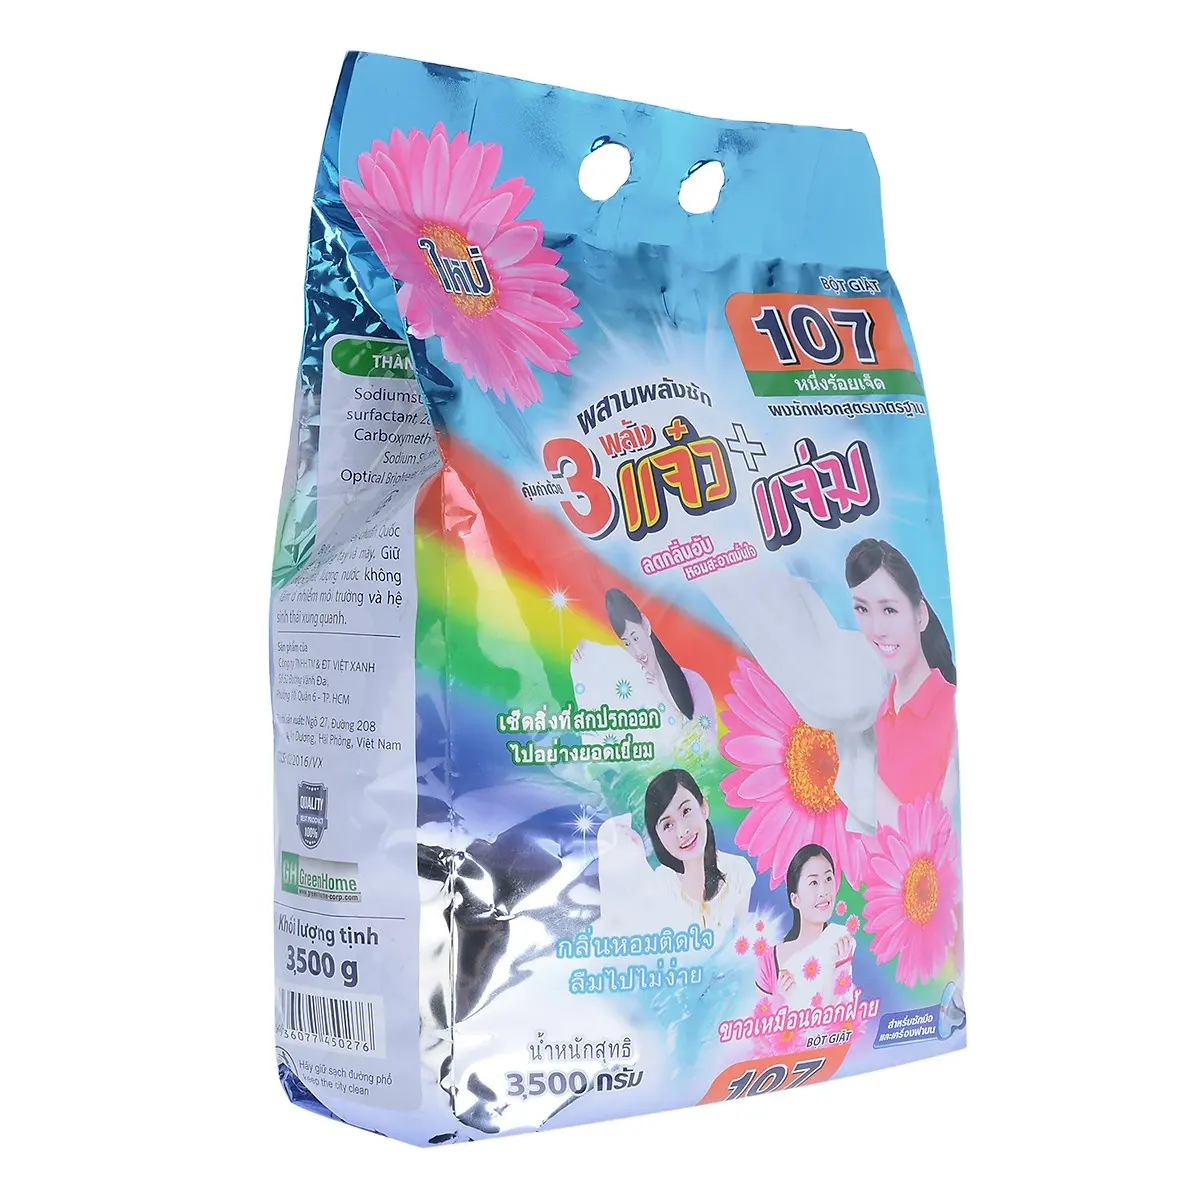 Super Clean Washing Powder To Keep Clothes Color and Fragrance,Cheap Fragrance Washing Powder From Vietnam